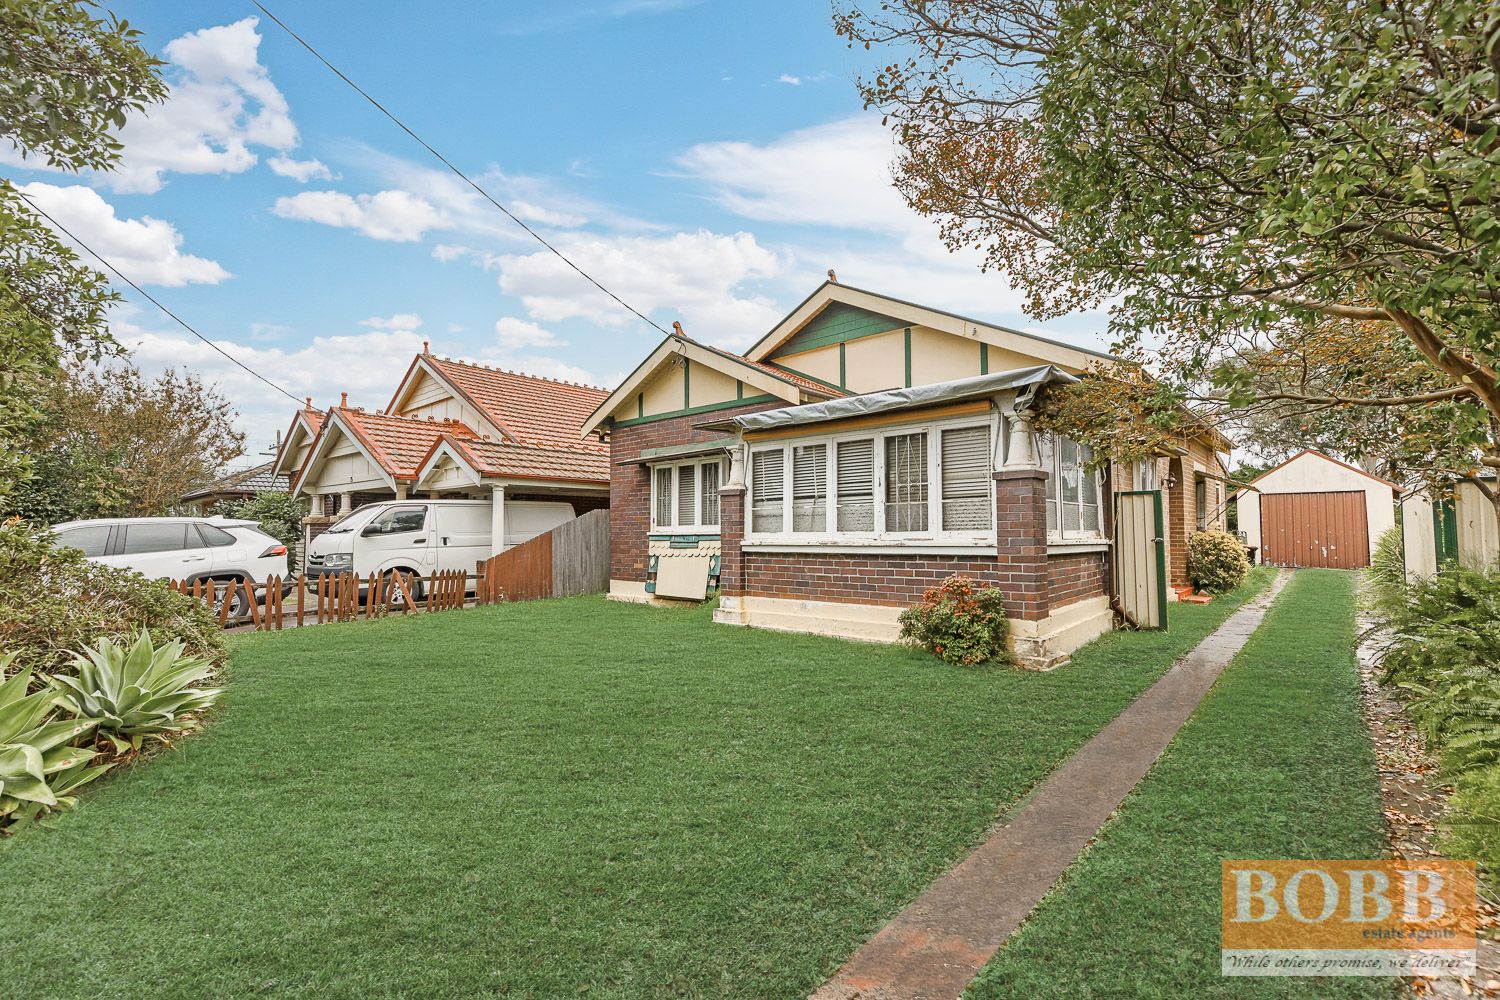 13 HILLVIEW ST, Roselands NSW 2196, Image 0